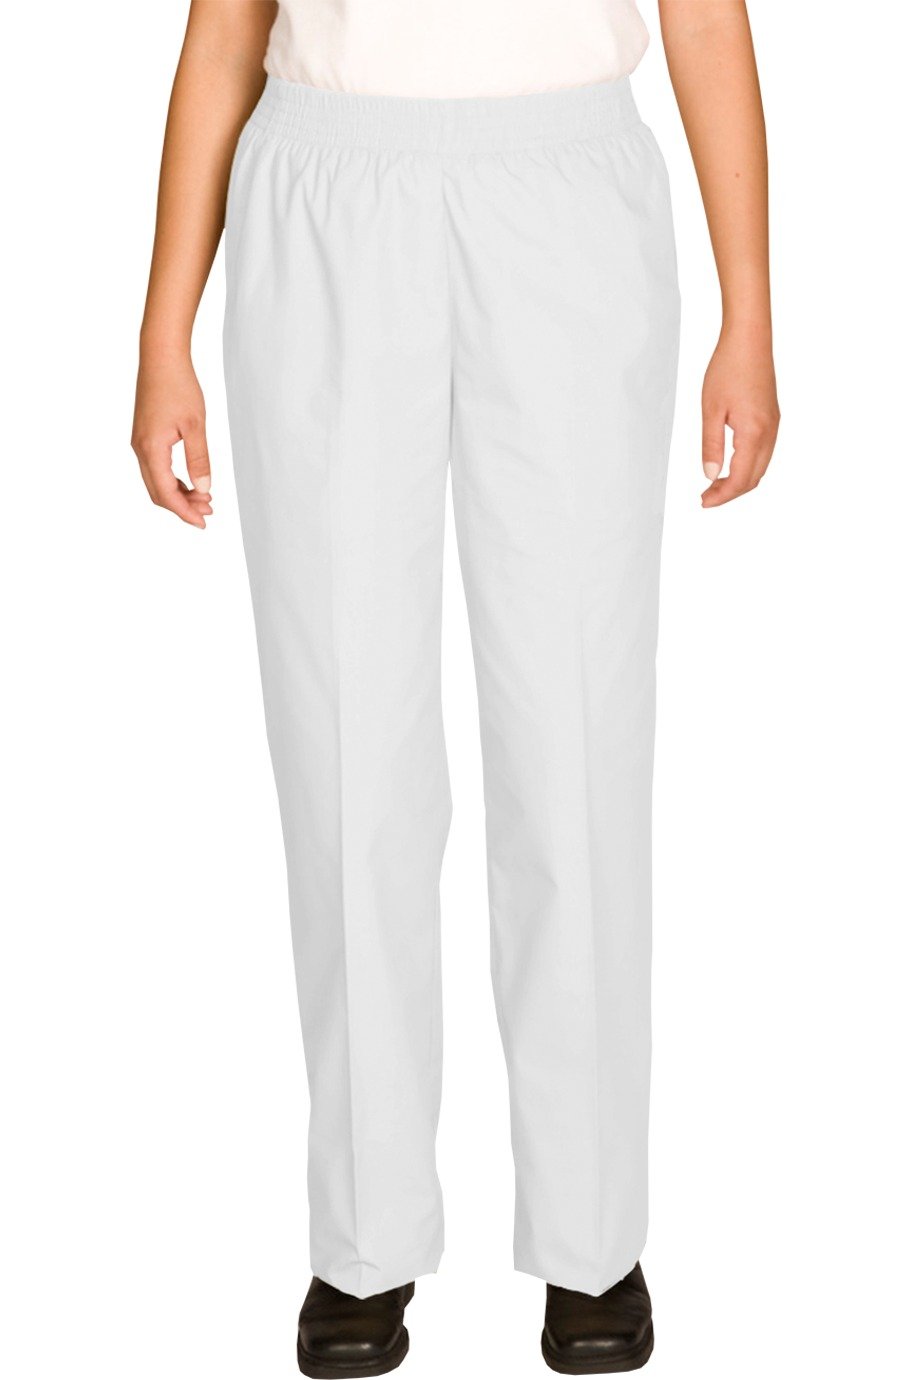 Misses' Poly Cotton Solid Pull-On Pant - Lotus Uniforms